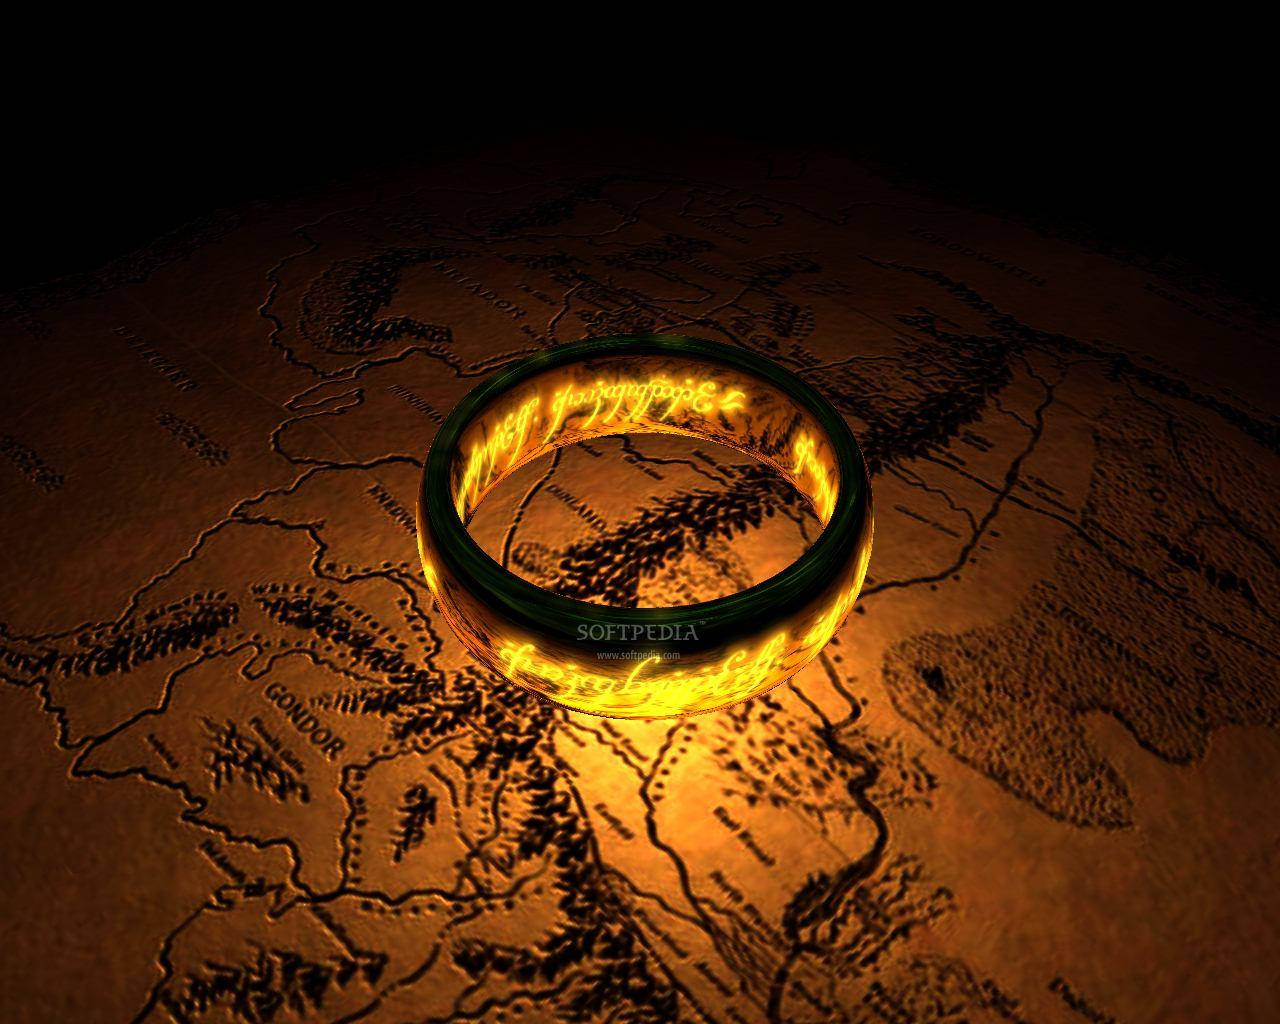 Fellowship of the ring on the journey to Middle Earth Wallpaper